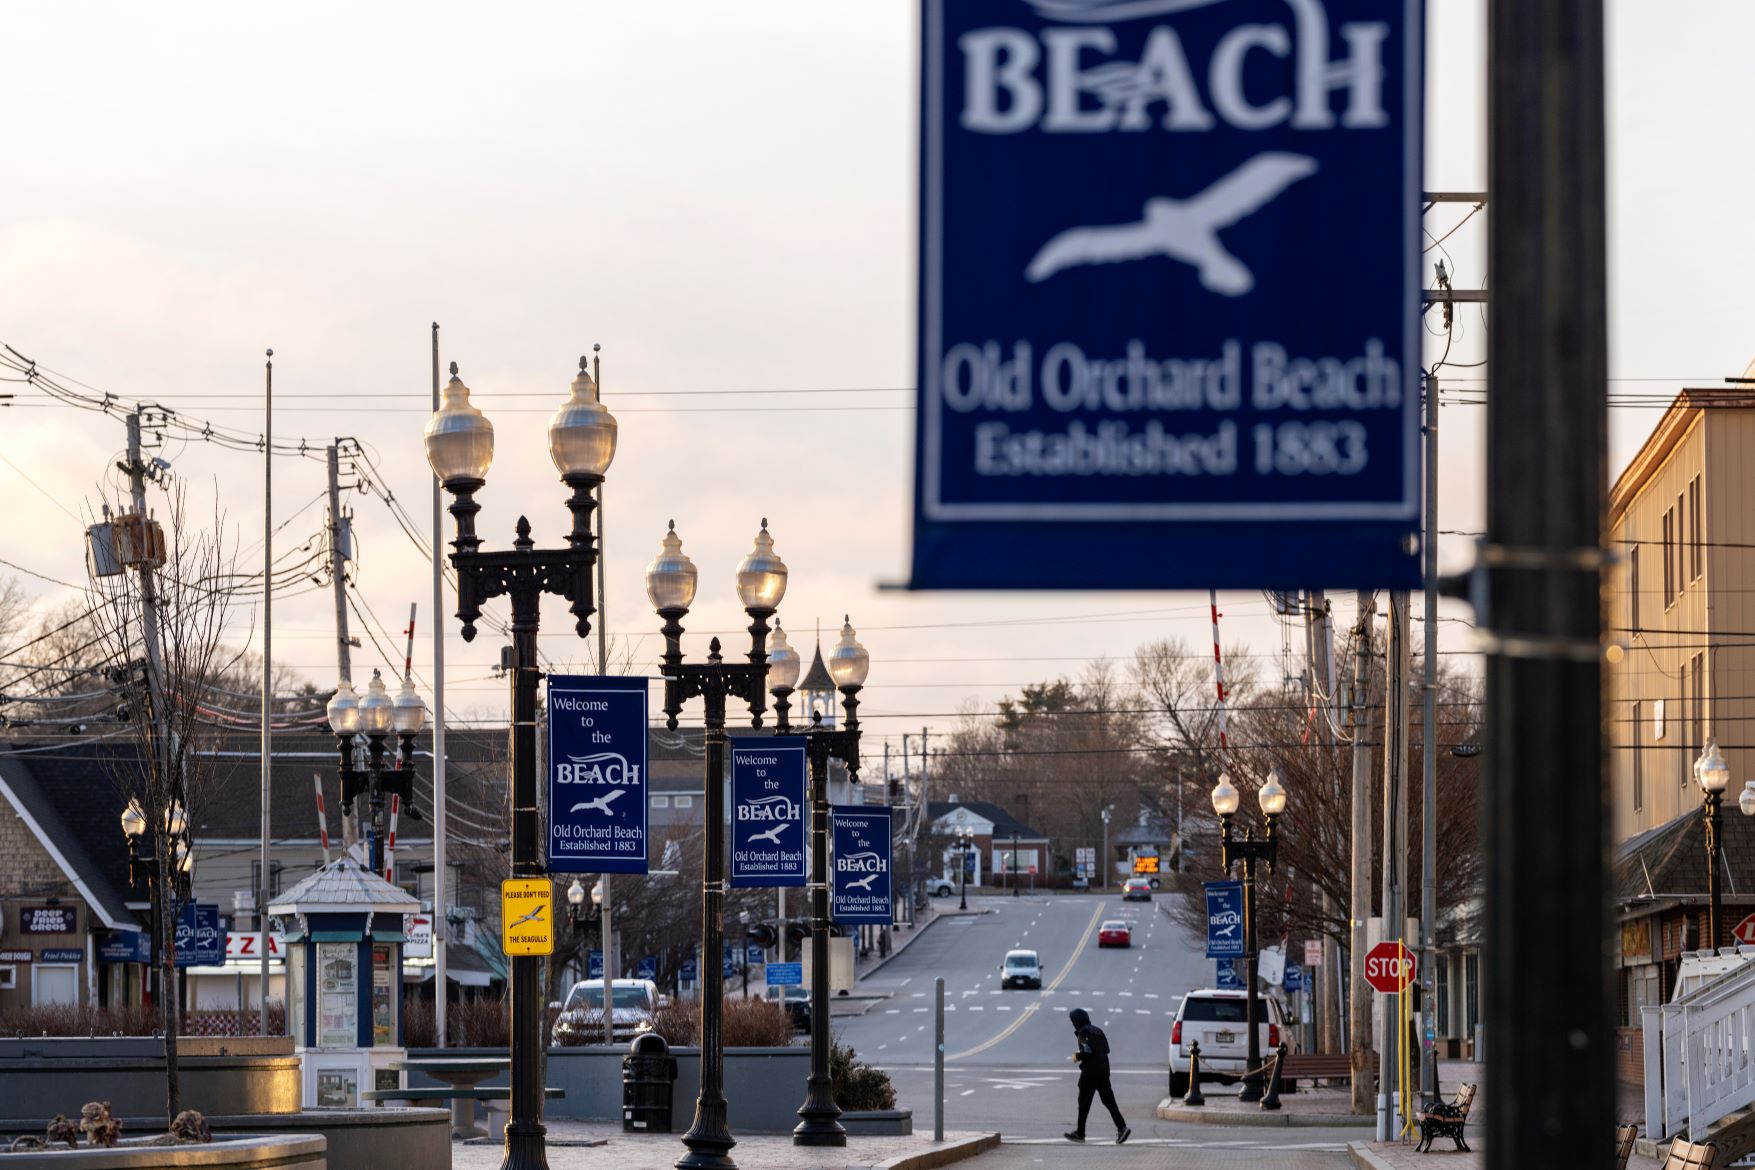 A man crosses a street in Old Orchard Beach. Hanging from several lamp posts are blue signs promoting the town of Old Orchard Beach.